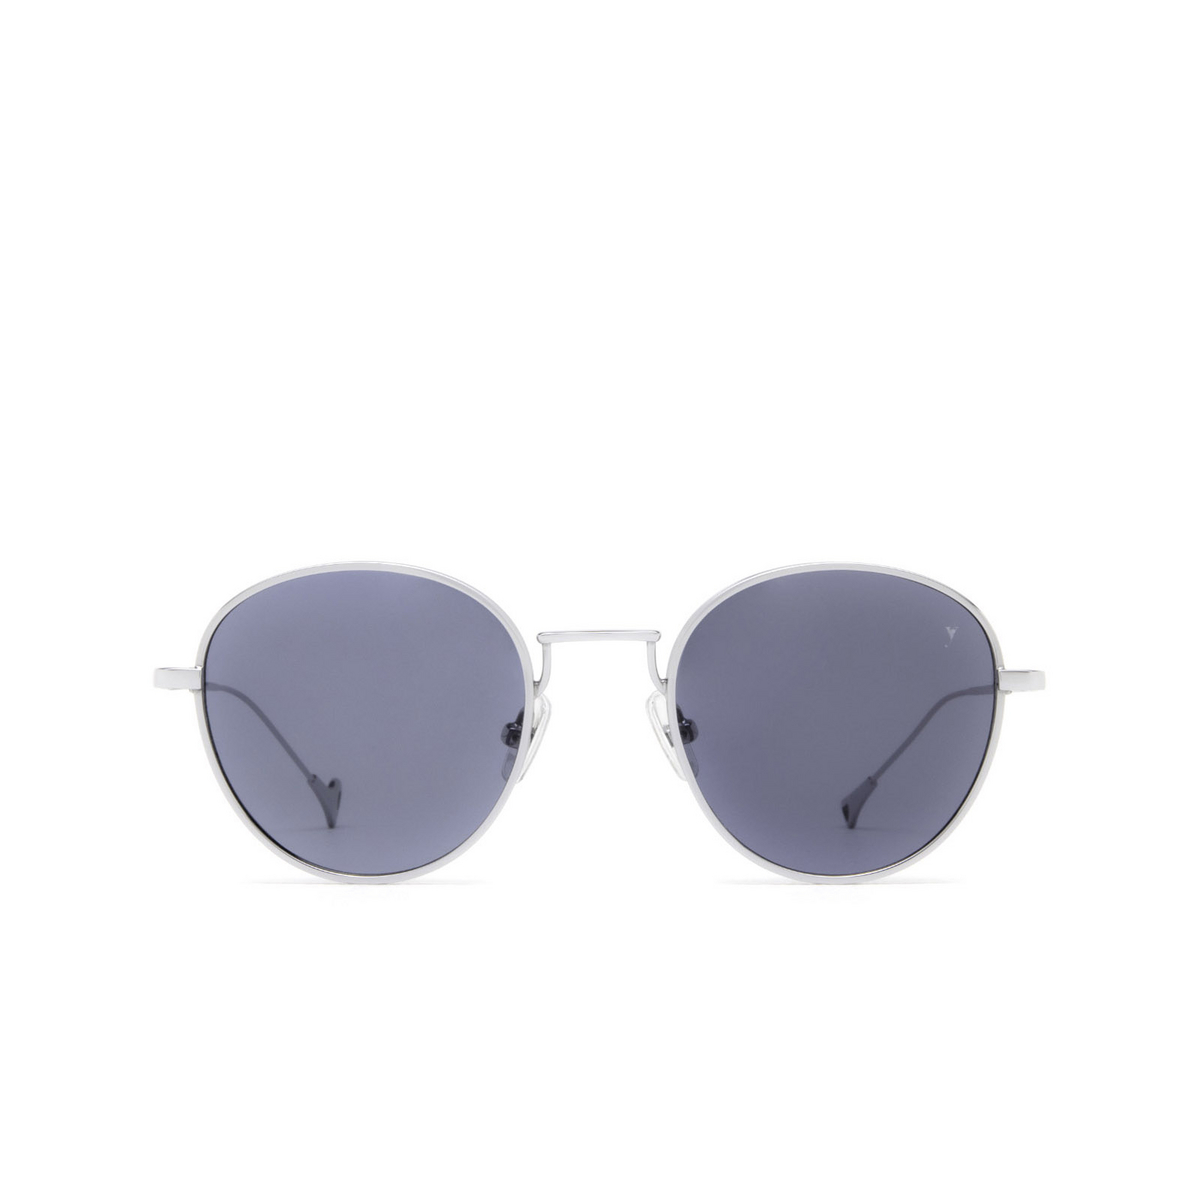 Eyepetizer® Round Sunglasses: Alen color Silver C.1-39 - front view.